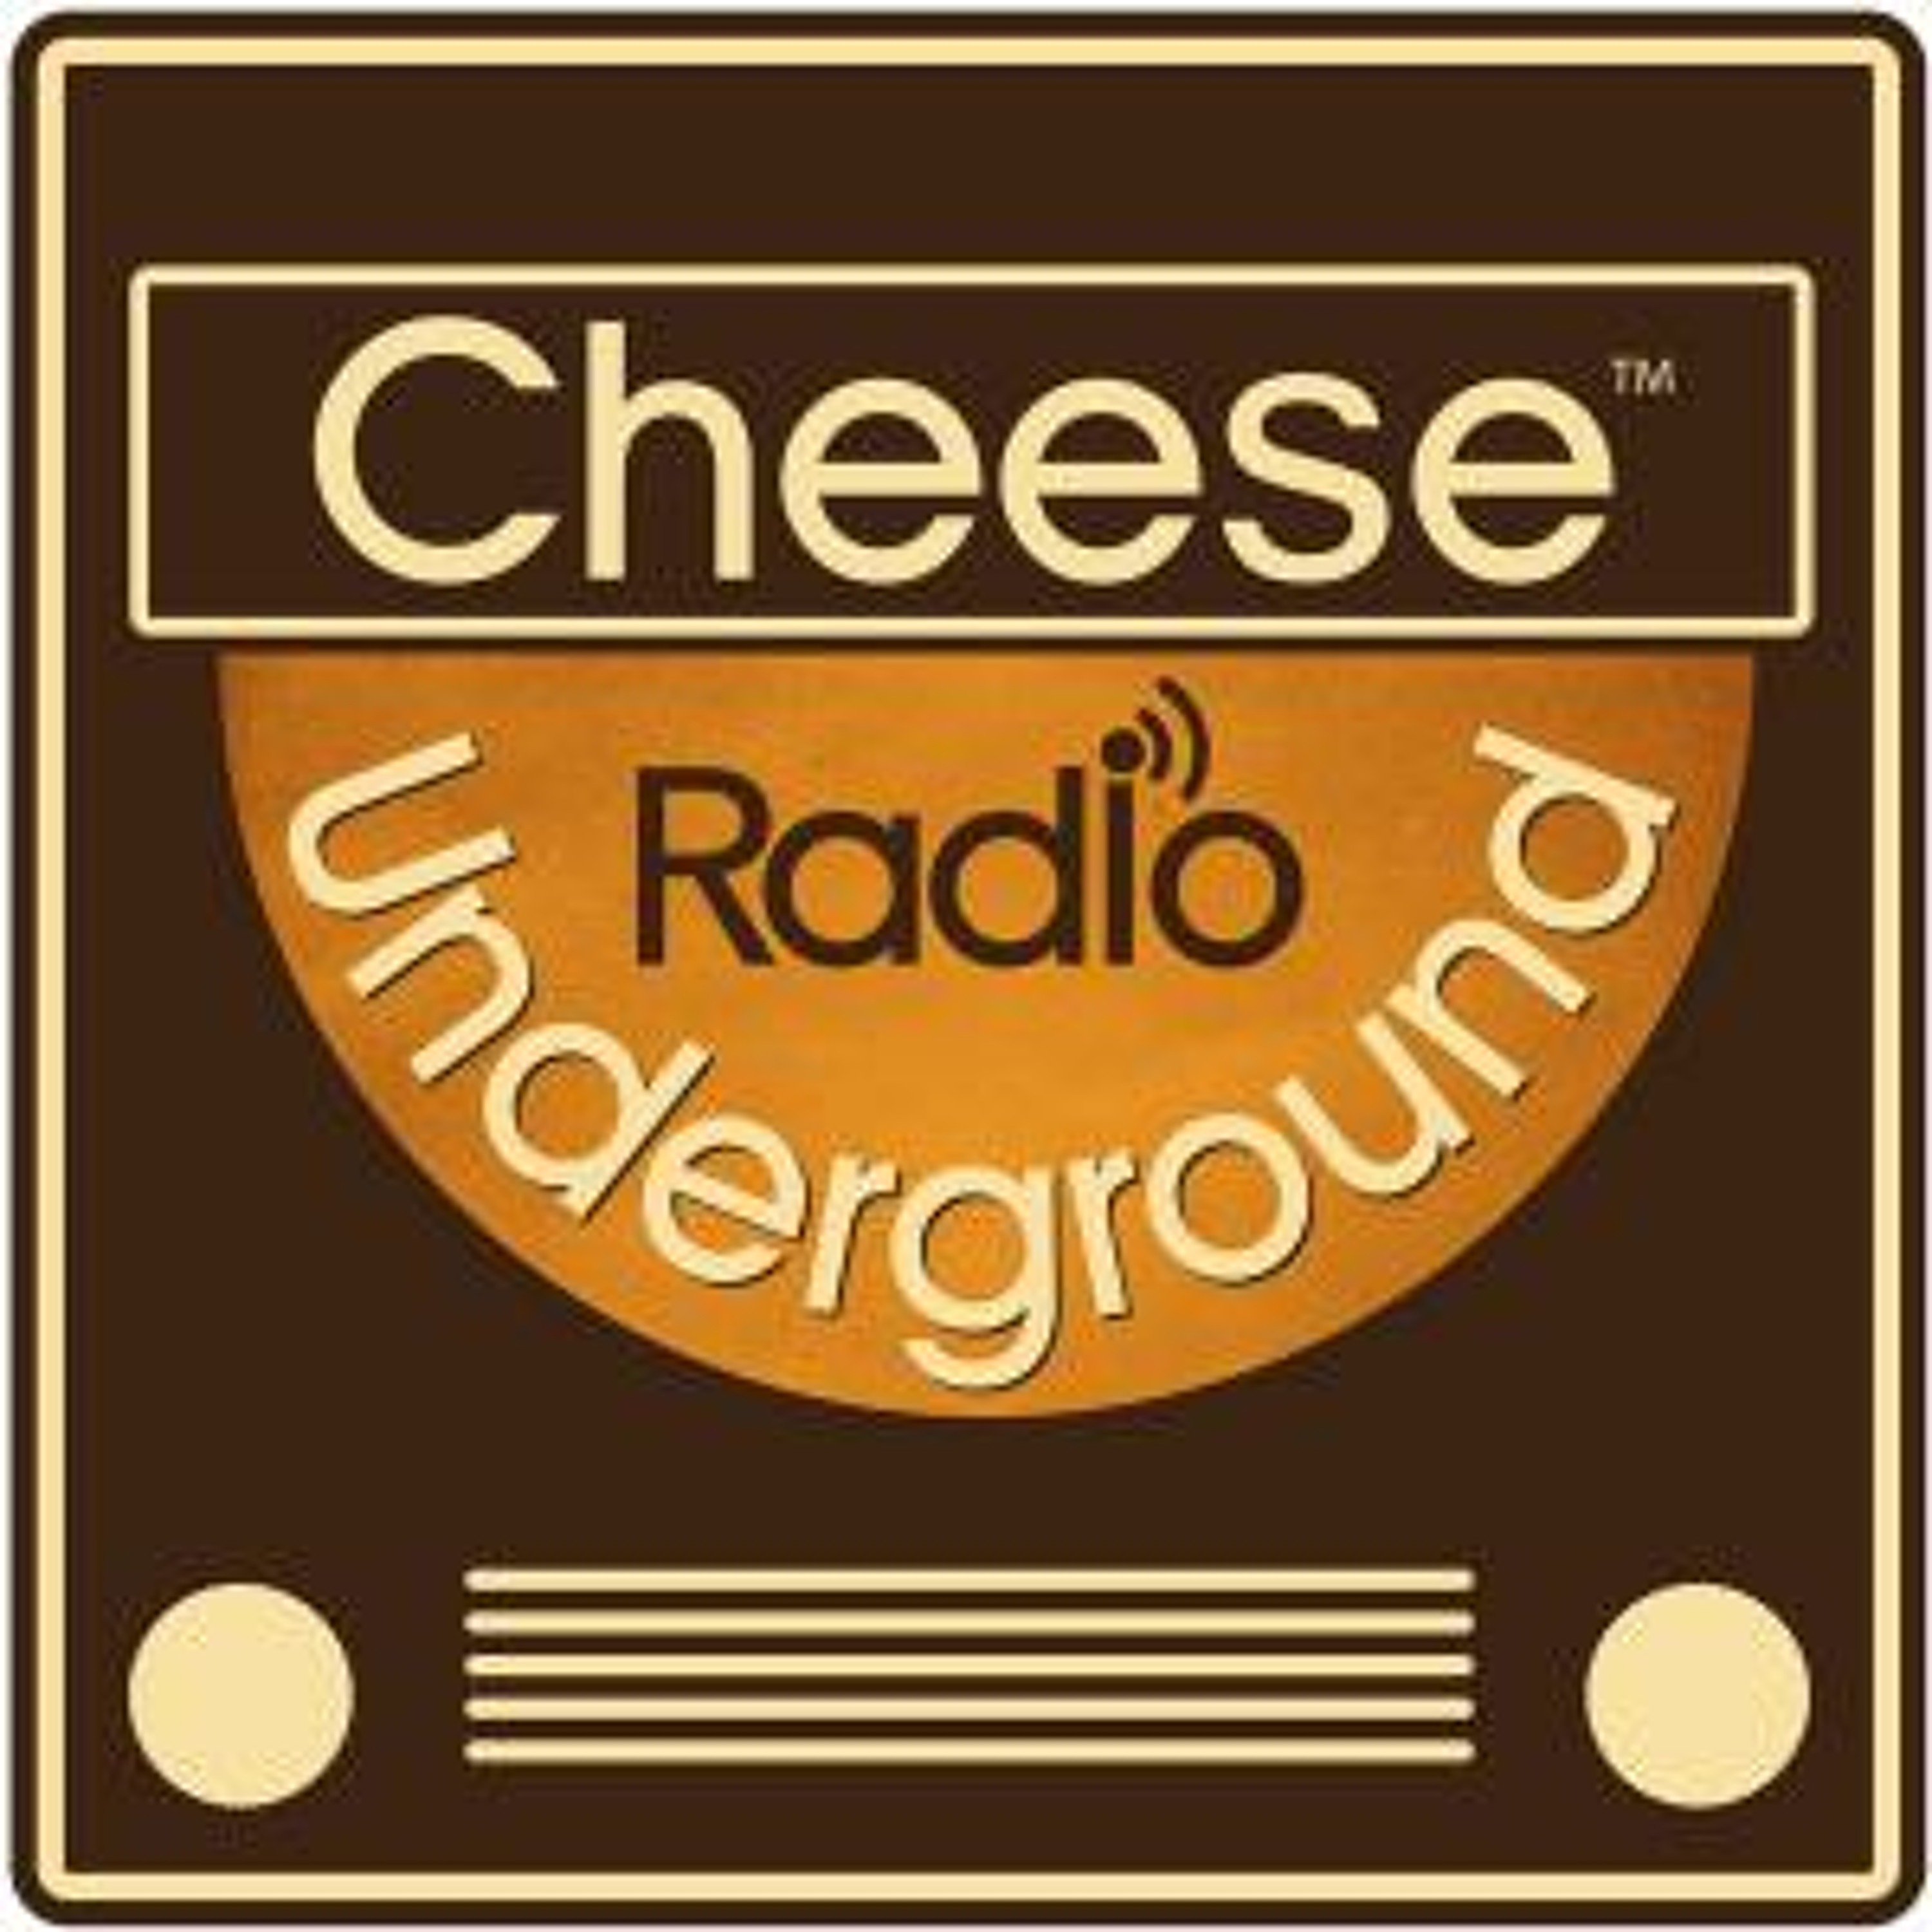 Episode 12 - 50 Years Over the Vat: Master Cheesemaker Sid Cook